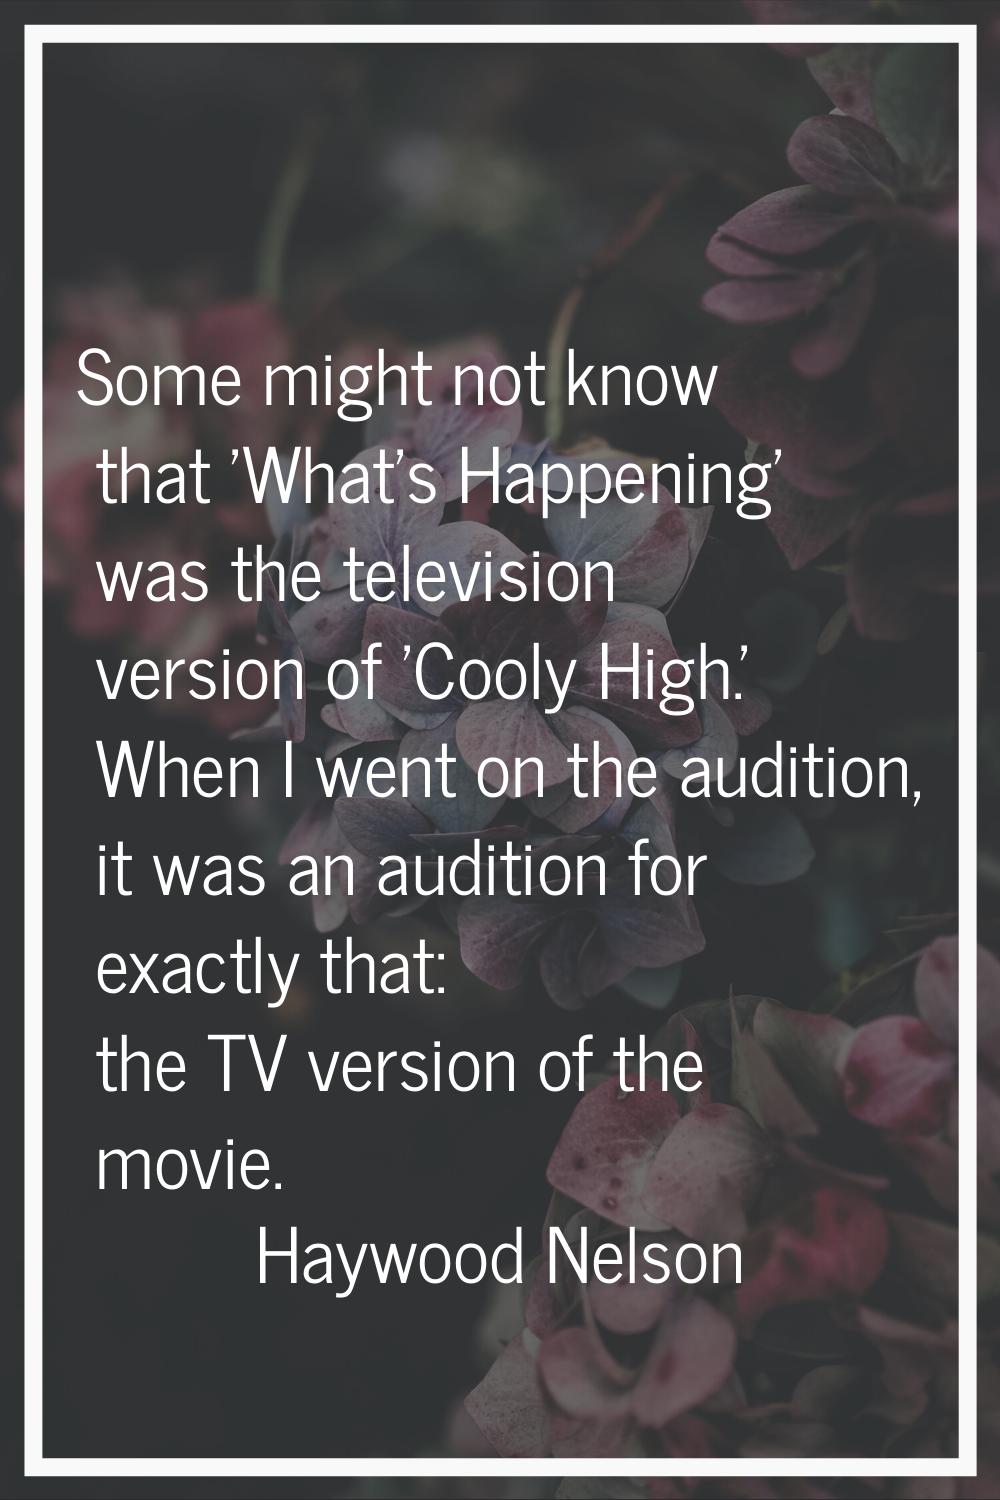 Some might not know that 'What's Happening' was the television version of 'Cooly High.' When I went